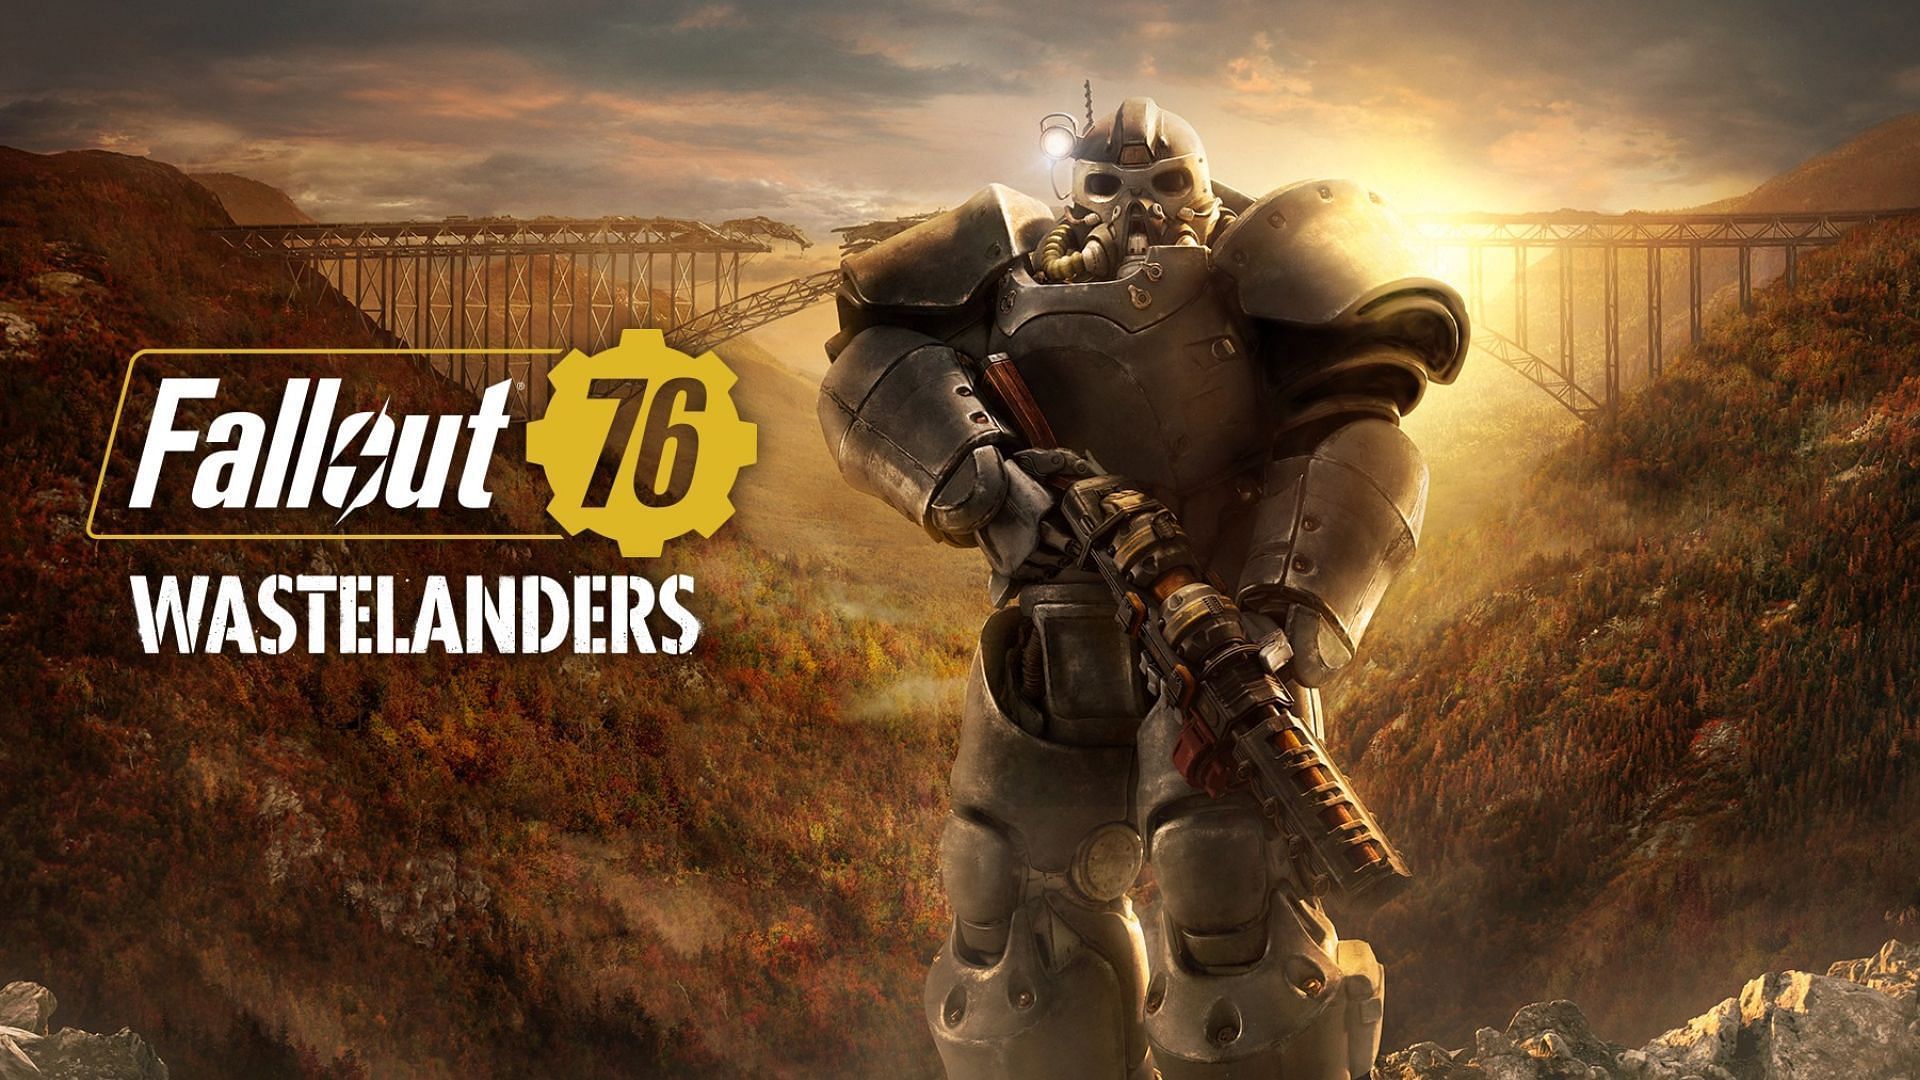 Fallout 76 is a shooting Role Playing Game (Image via Bethesda Game Studios)